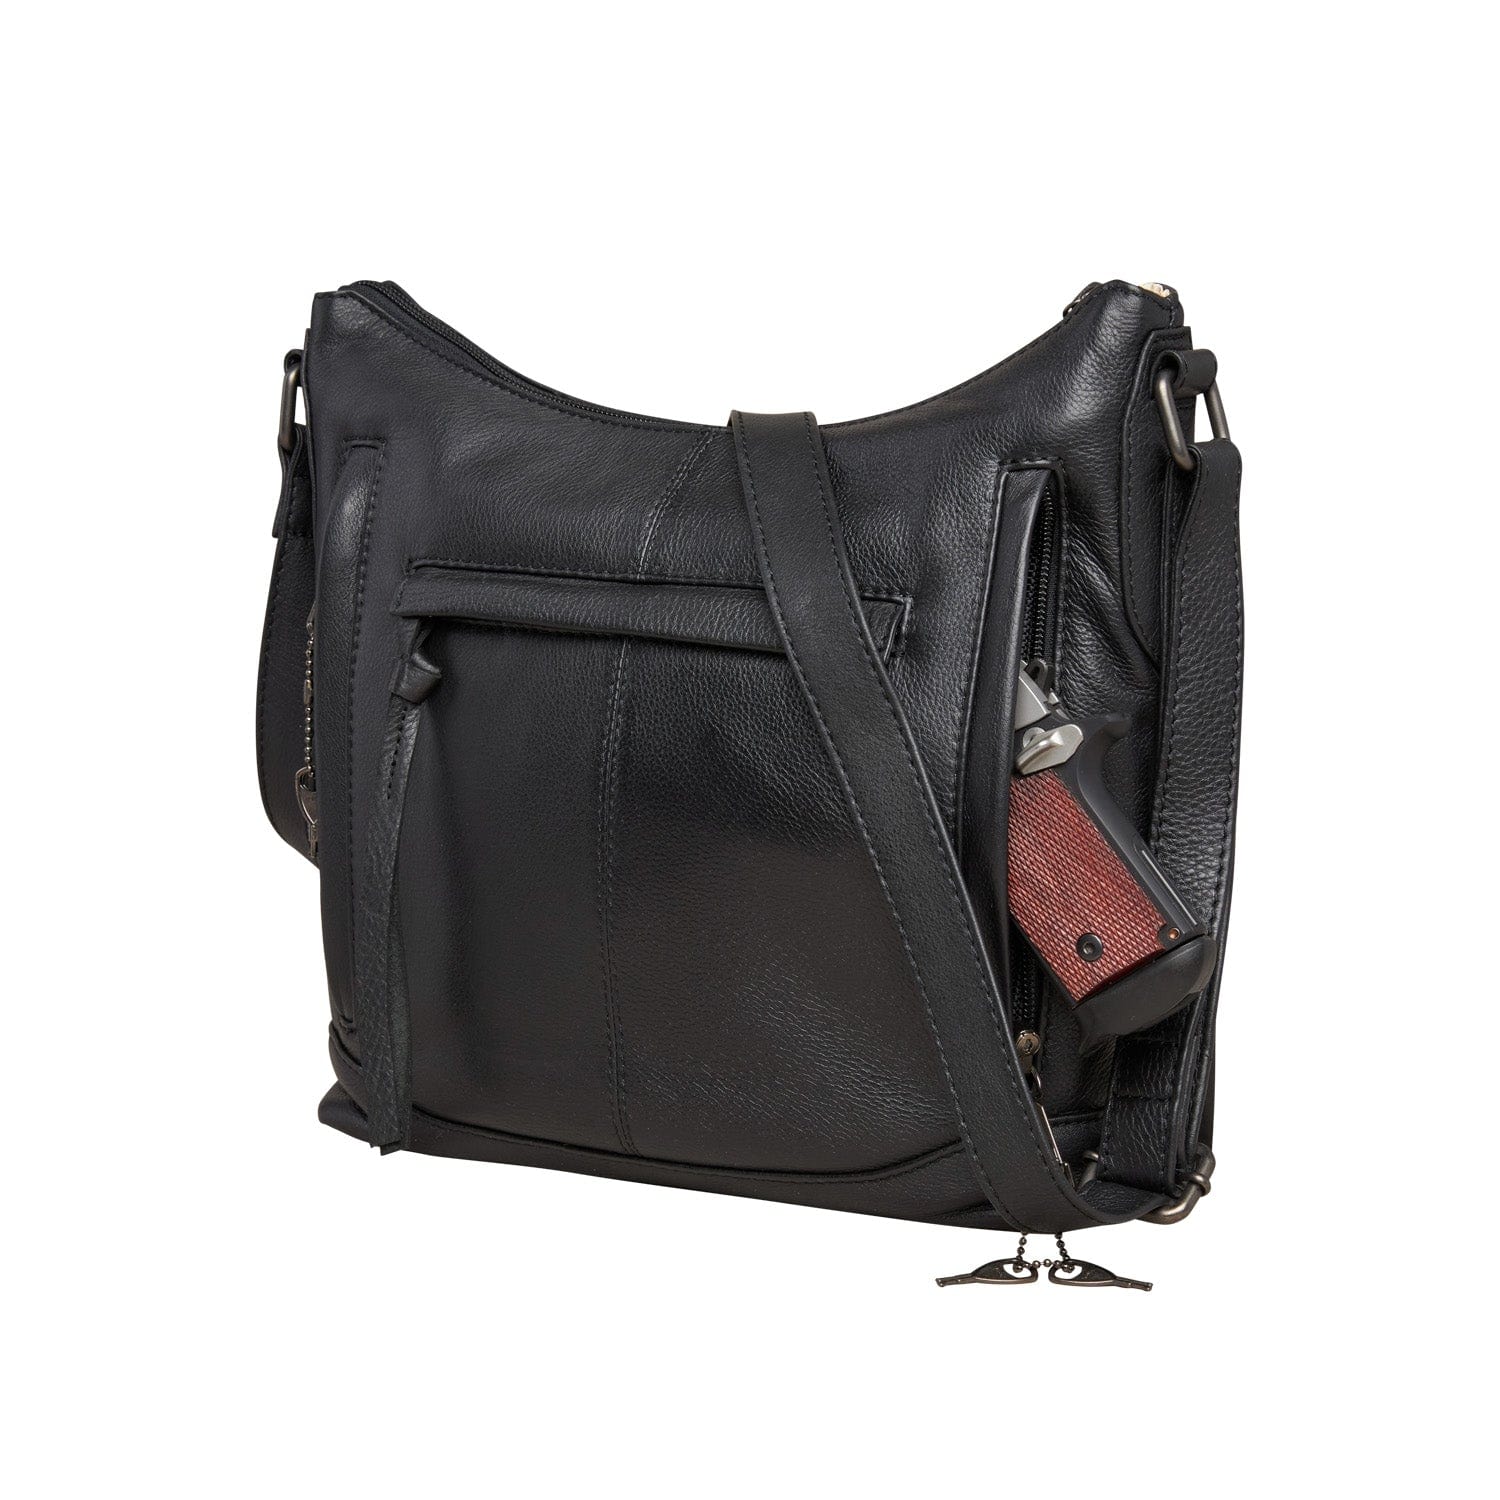 Concealed Carry Blake Scooped Leather Crossbody -  Lady Conceal -  Concealed Carry Purse -  black crossbody purse designer -  black owned purse designers -  crossbody bag for concealed gun carry -  concealed carry gun bags -  concealed carry crossbody bag -  concealed carry purse crossbody -  Gift for gun owners -  Women Gun Bag -  most popular crossbody bag -  crossbody handgun bag -  crossbody bags for everyday use